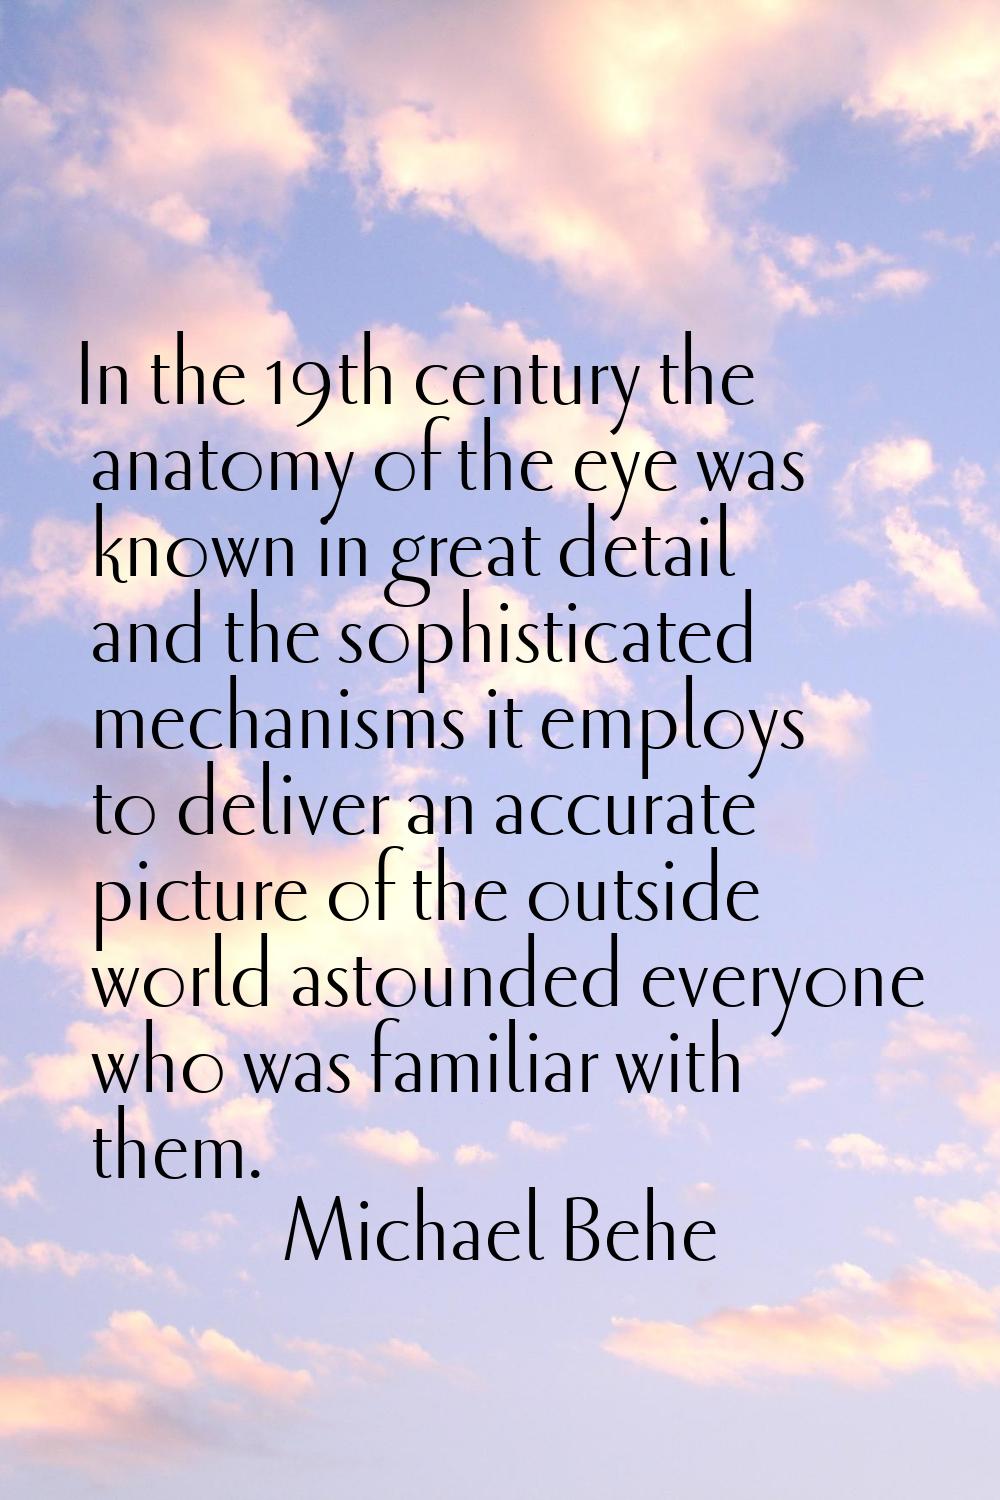 In the 19th century the anatomy of the eye was known in great detail and the sophisticated mechanis